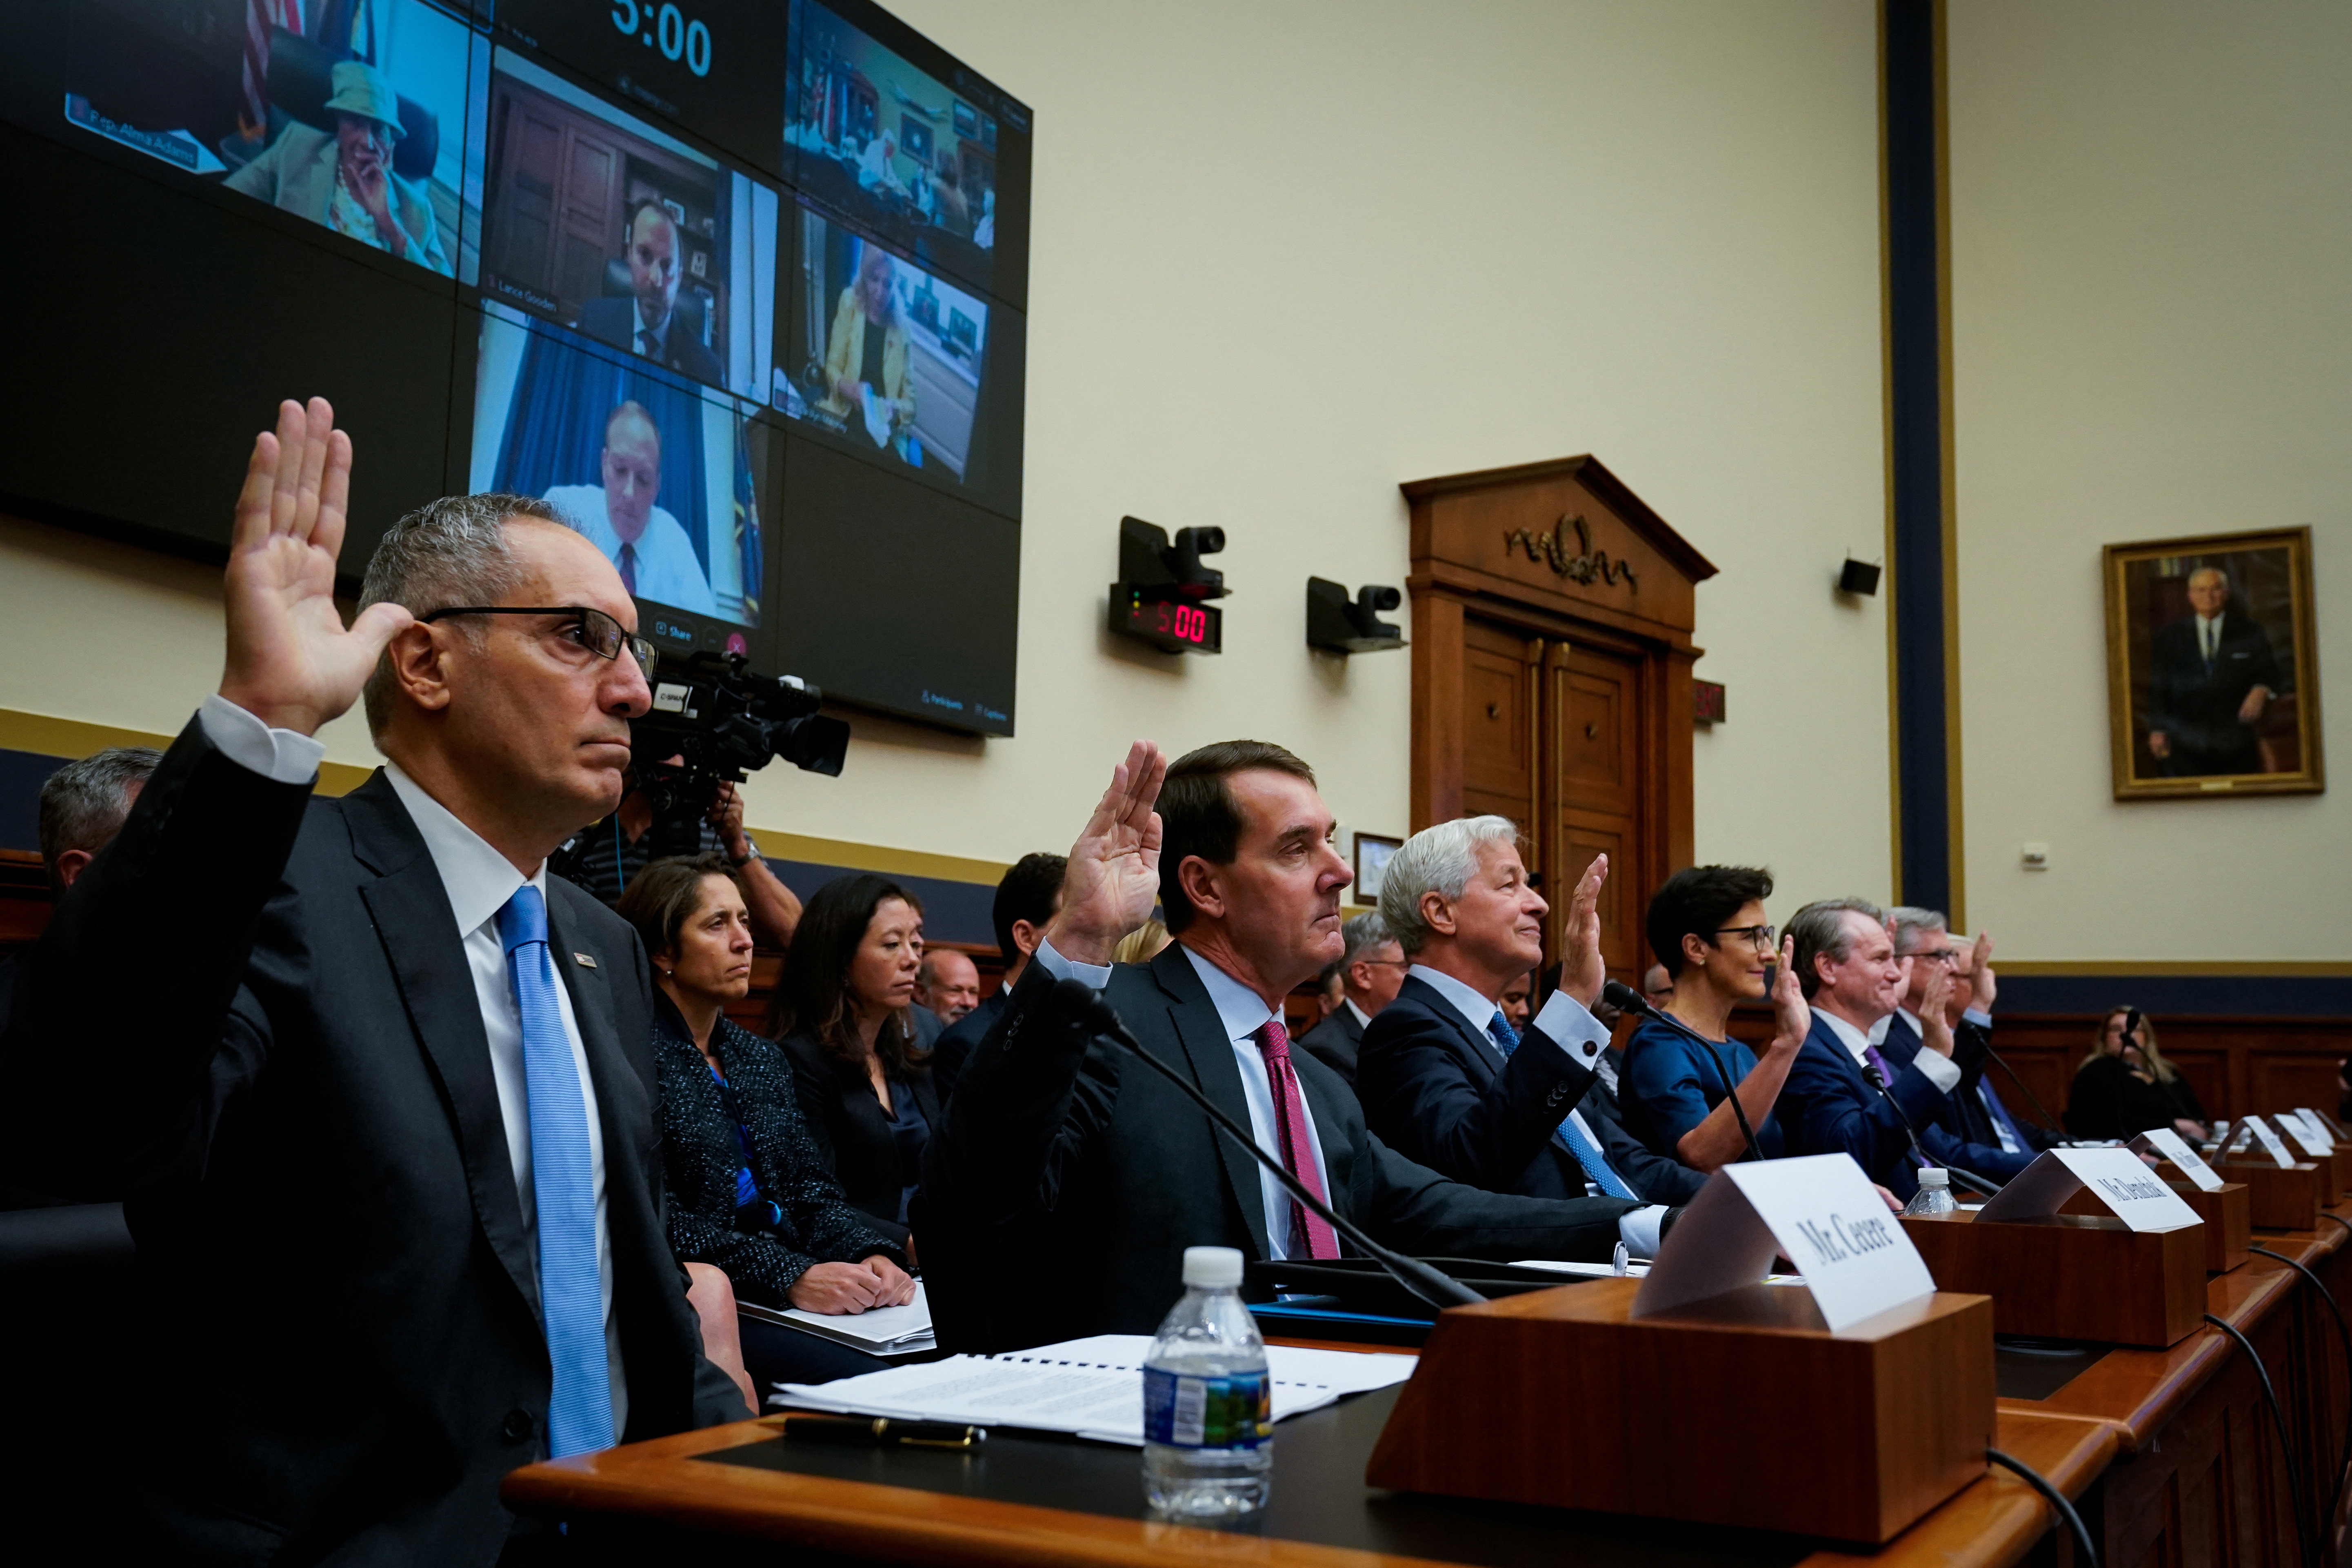 U.S. House Financial Services Committee hearing on Capitol Hill in Washington